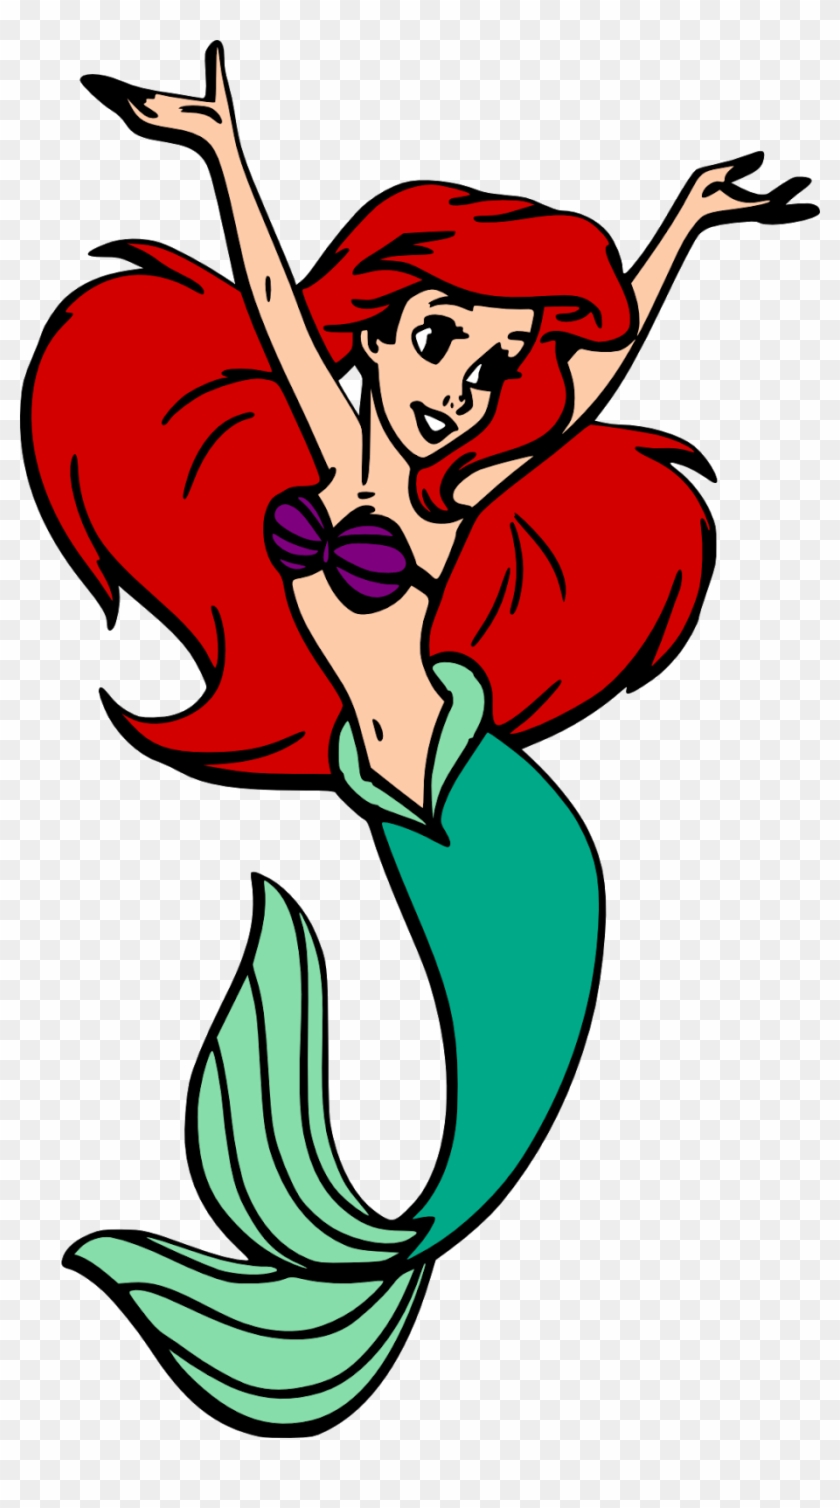 Crafting With Meek Ariel Svg Svgs Pinterest Ariel Ariel The Mermaid Clipart Svg Hd Png Download 915x1600 1174746 Pngfind